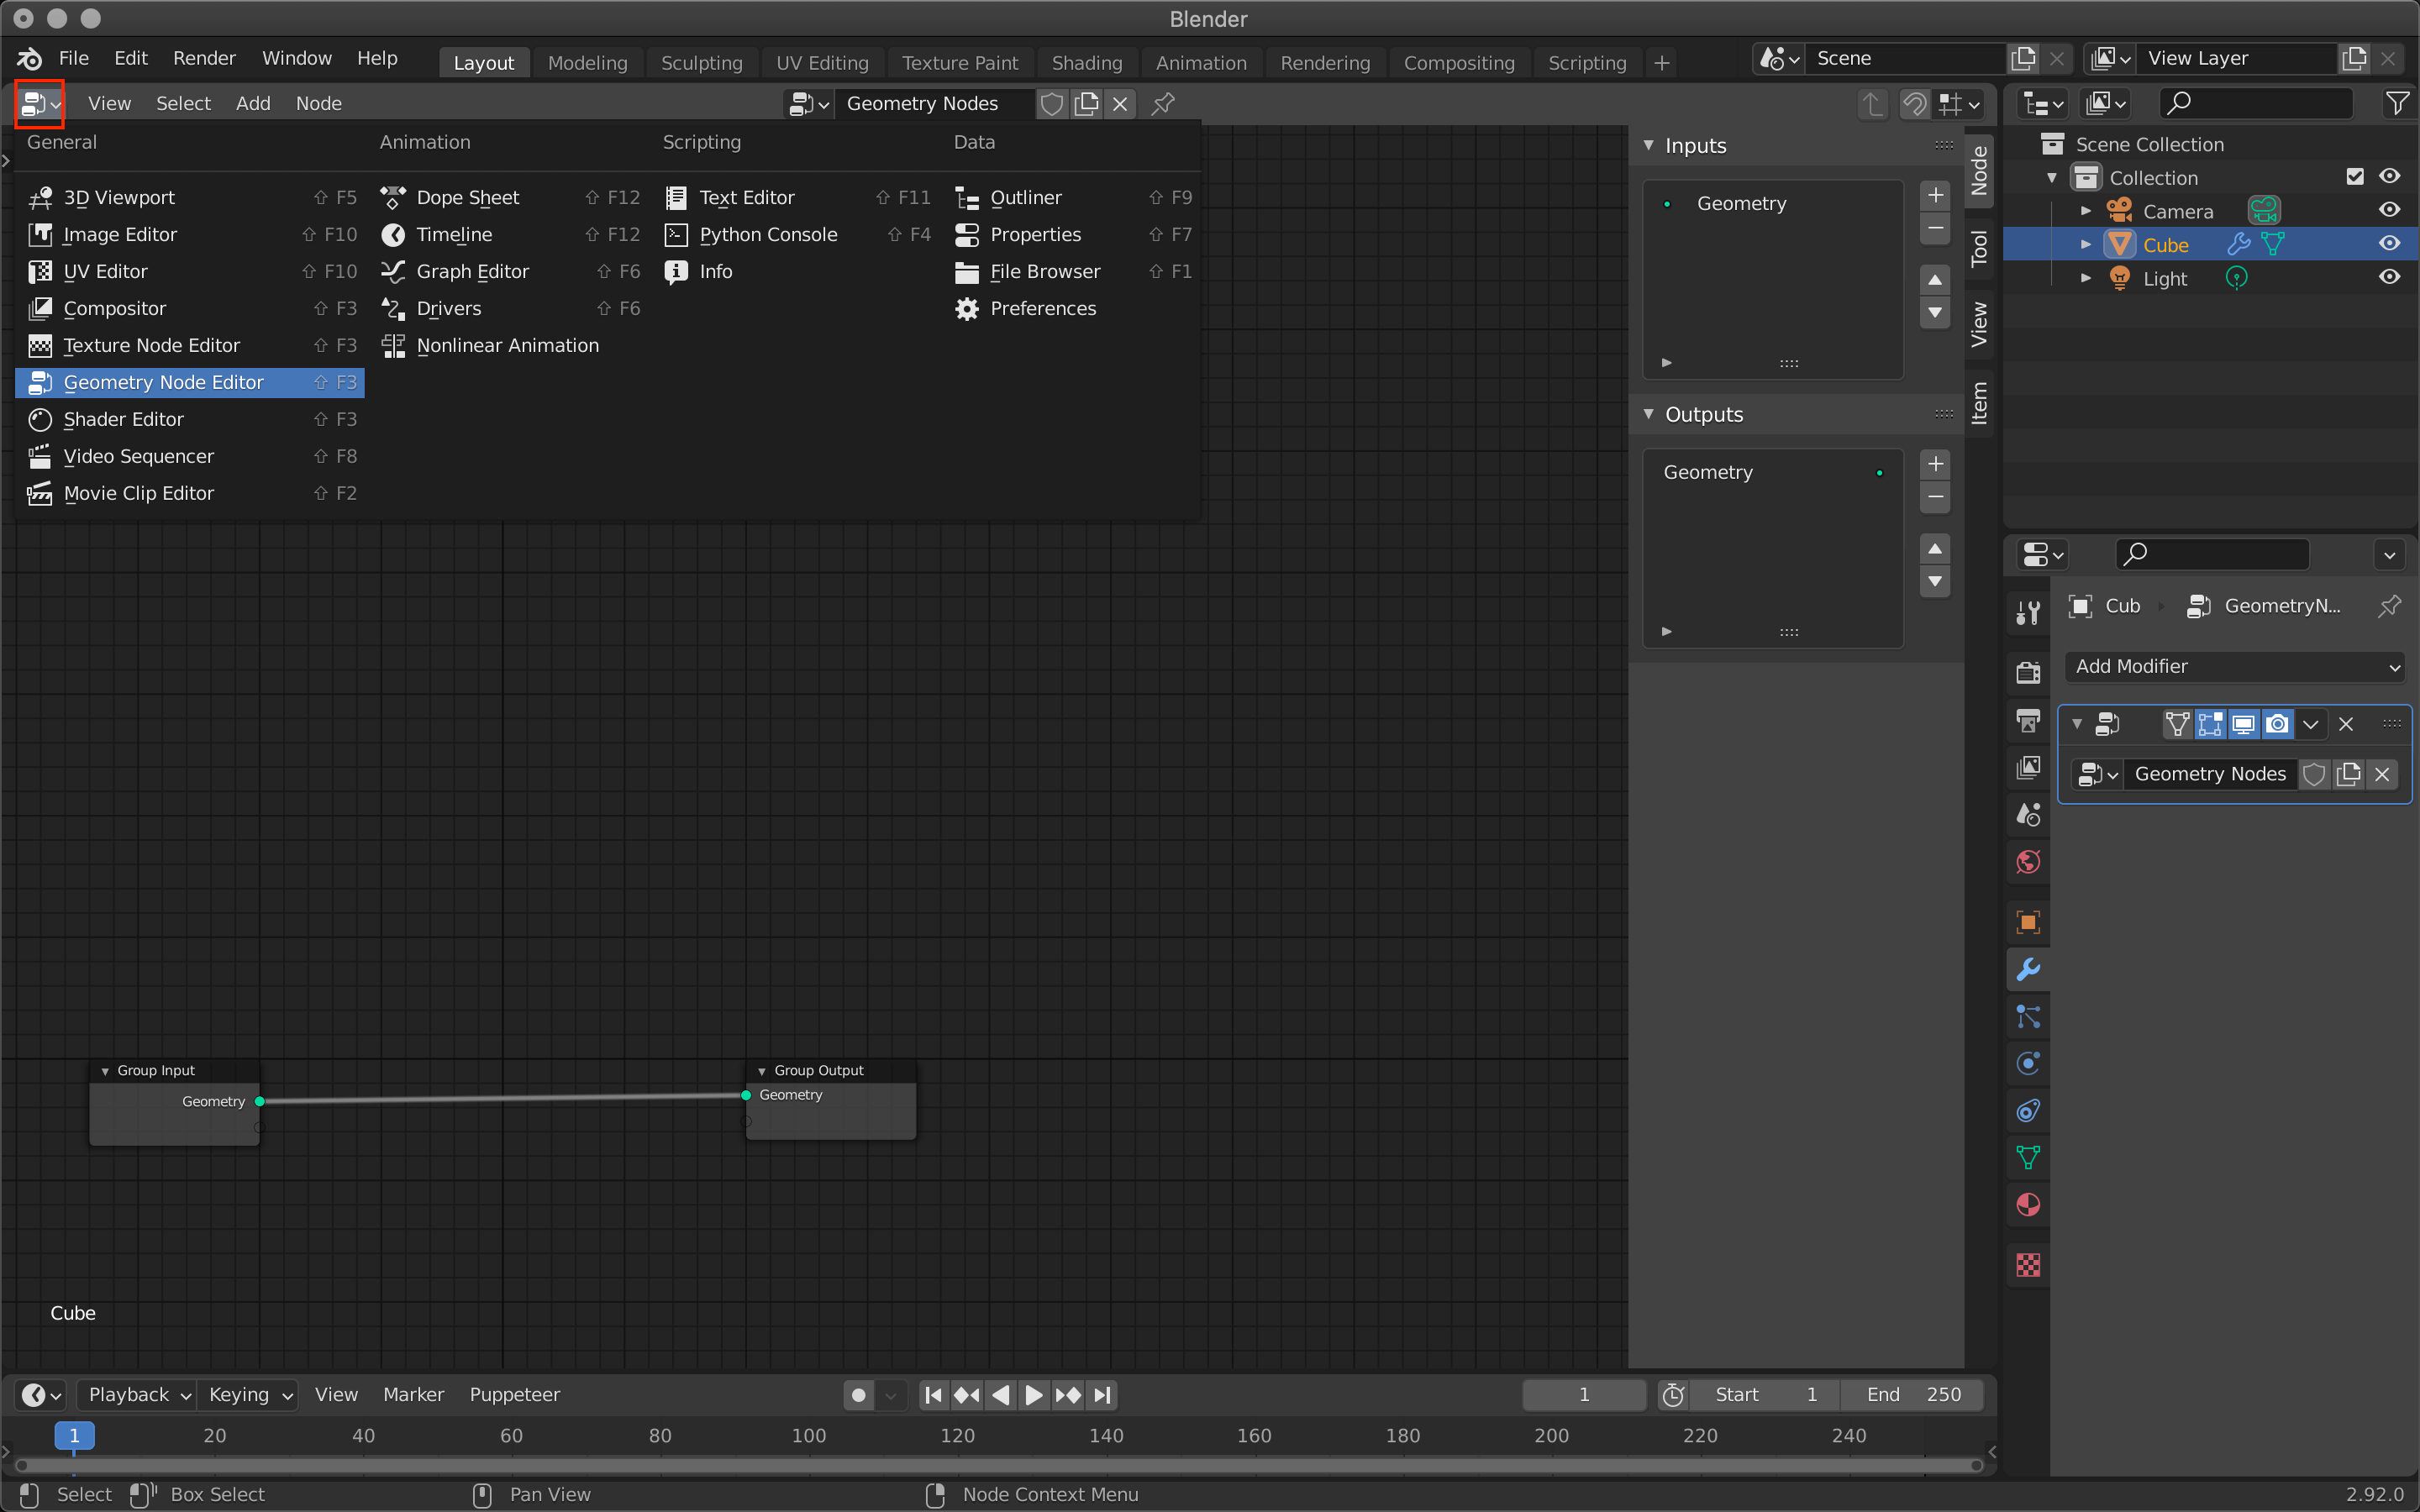 Switch to Node Geometry Node Editor with the upper left icon.